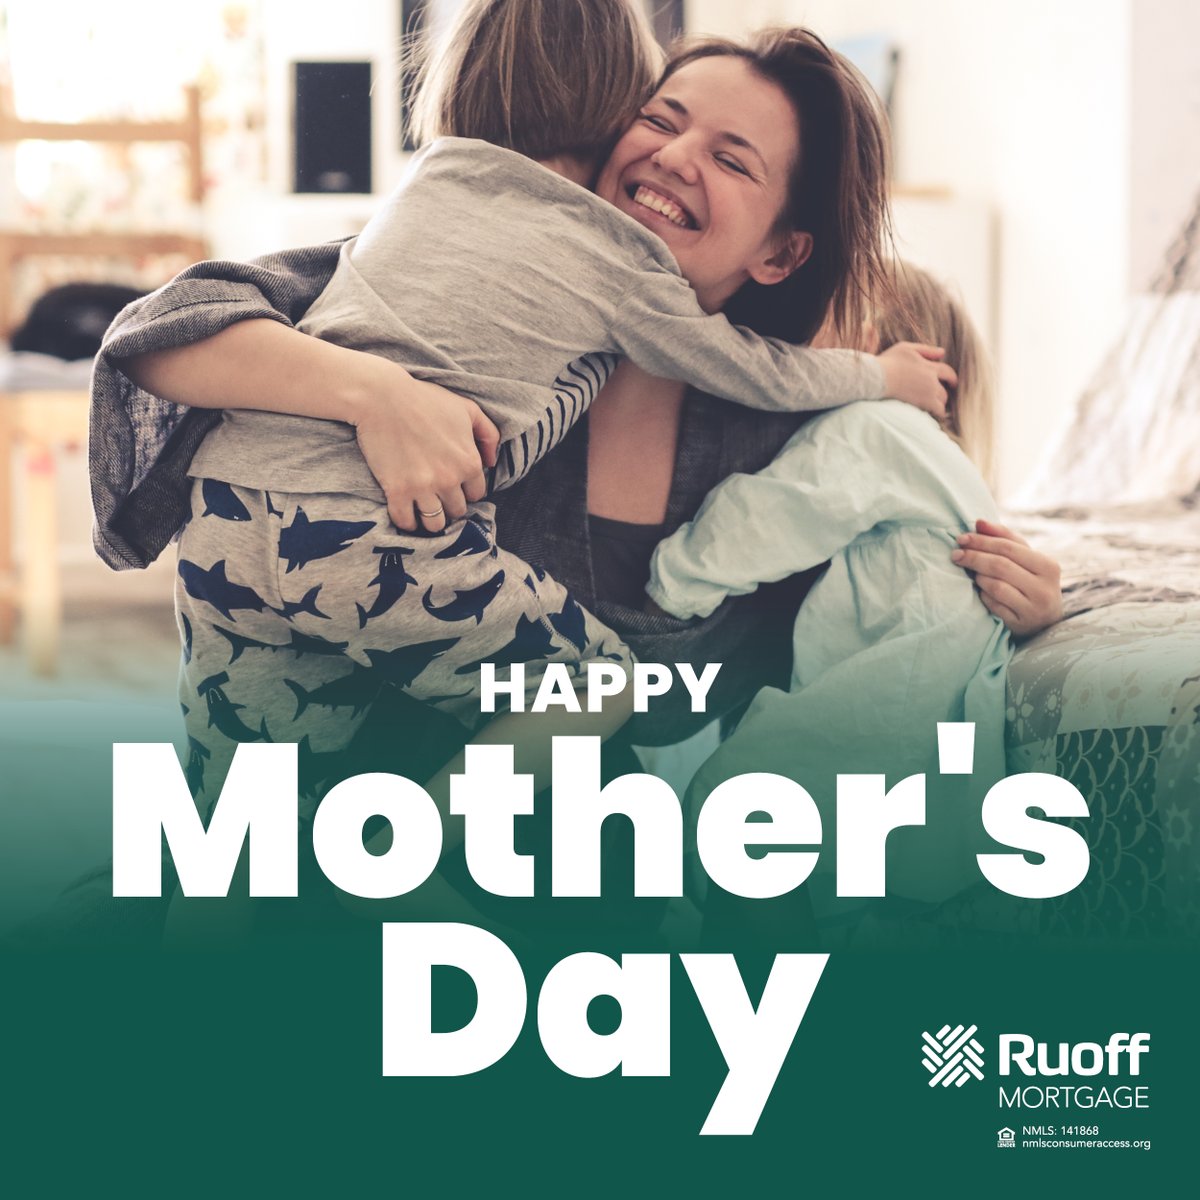 Happy Mother's Day to all the incredible moms out there! Your love and dedication make every house a home 💐